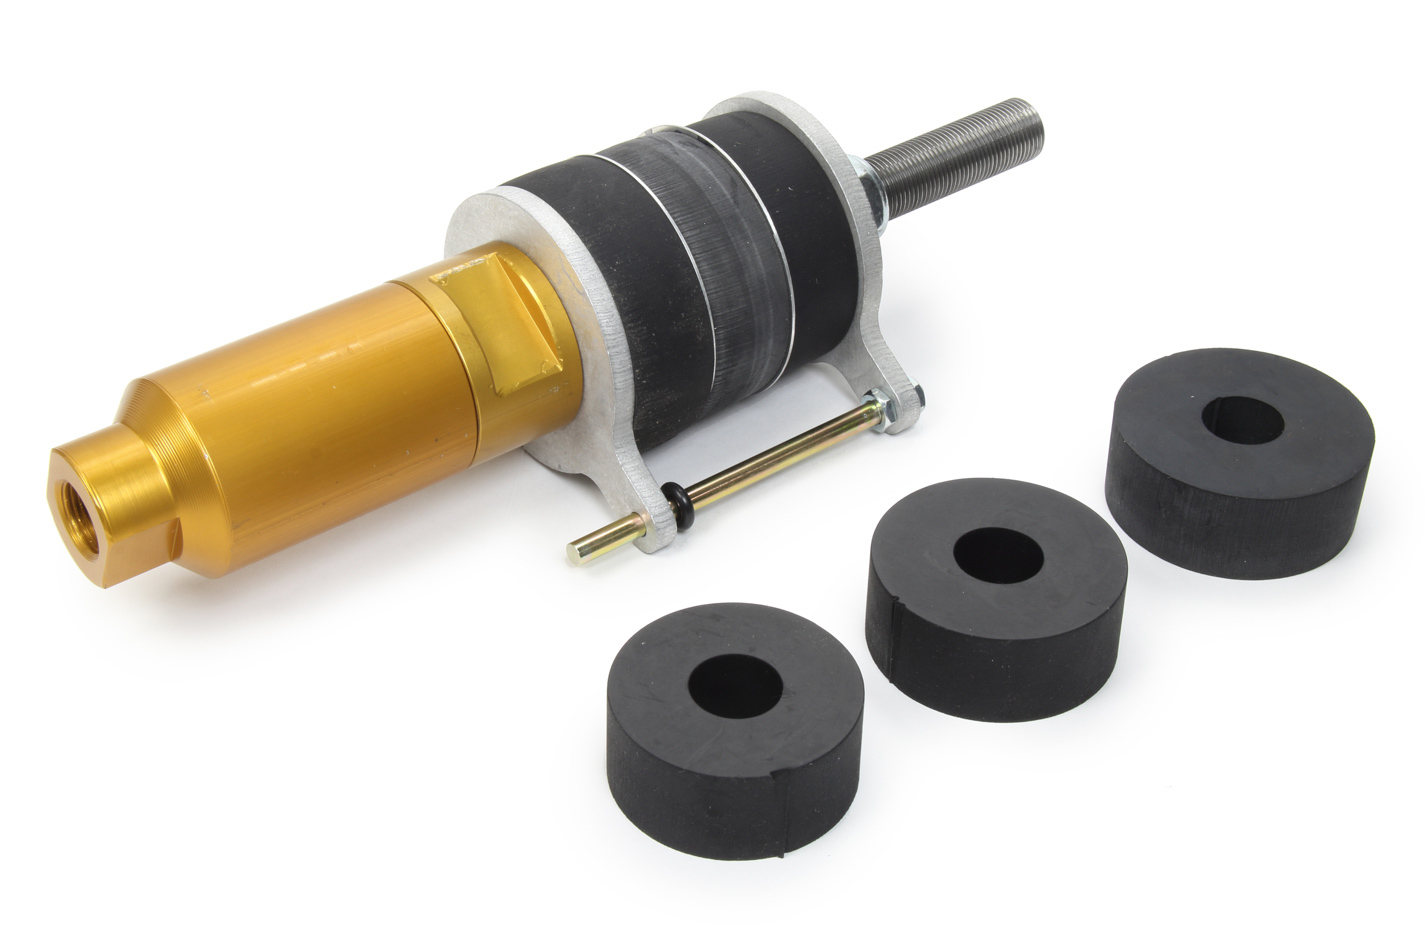 Coleman Racing Products 22040 Torque Absorber, Rubber Bushings, Aluminum, Gold Anodized, Each